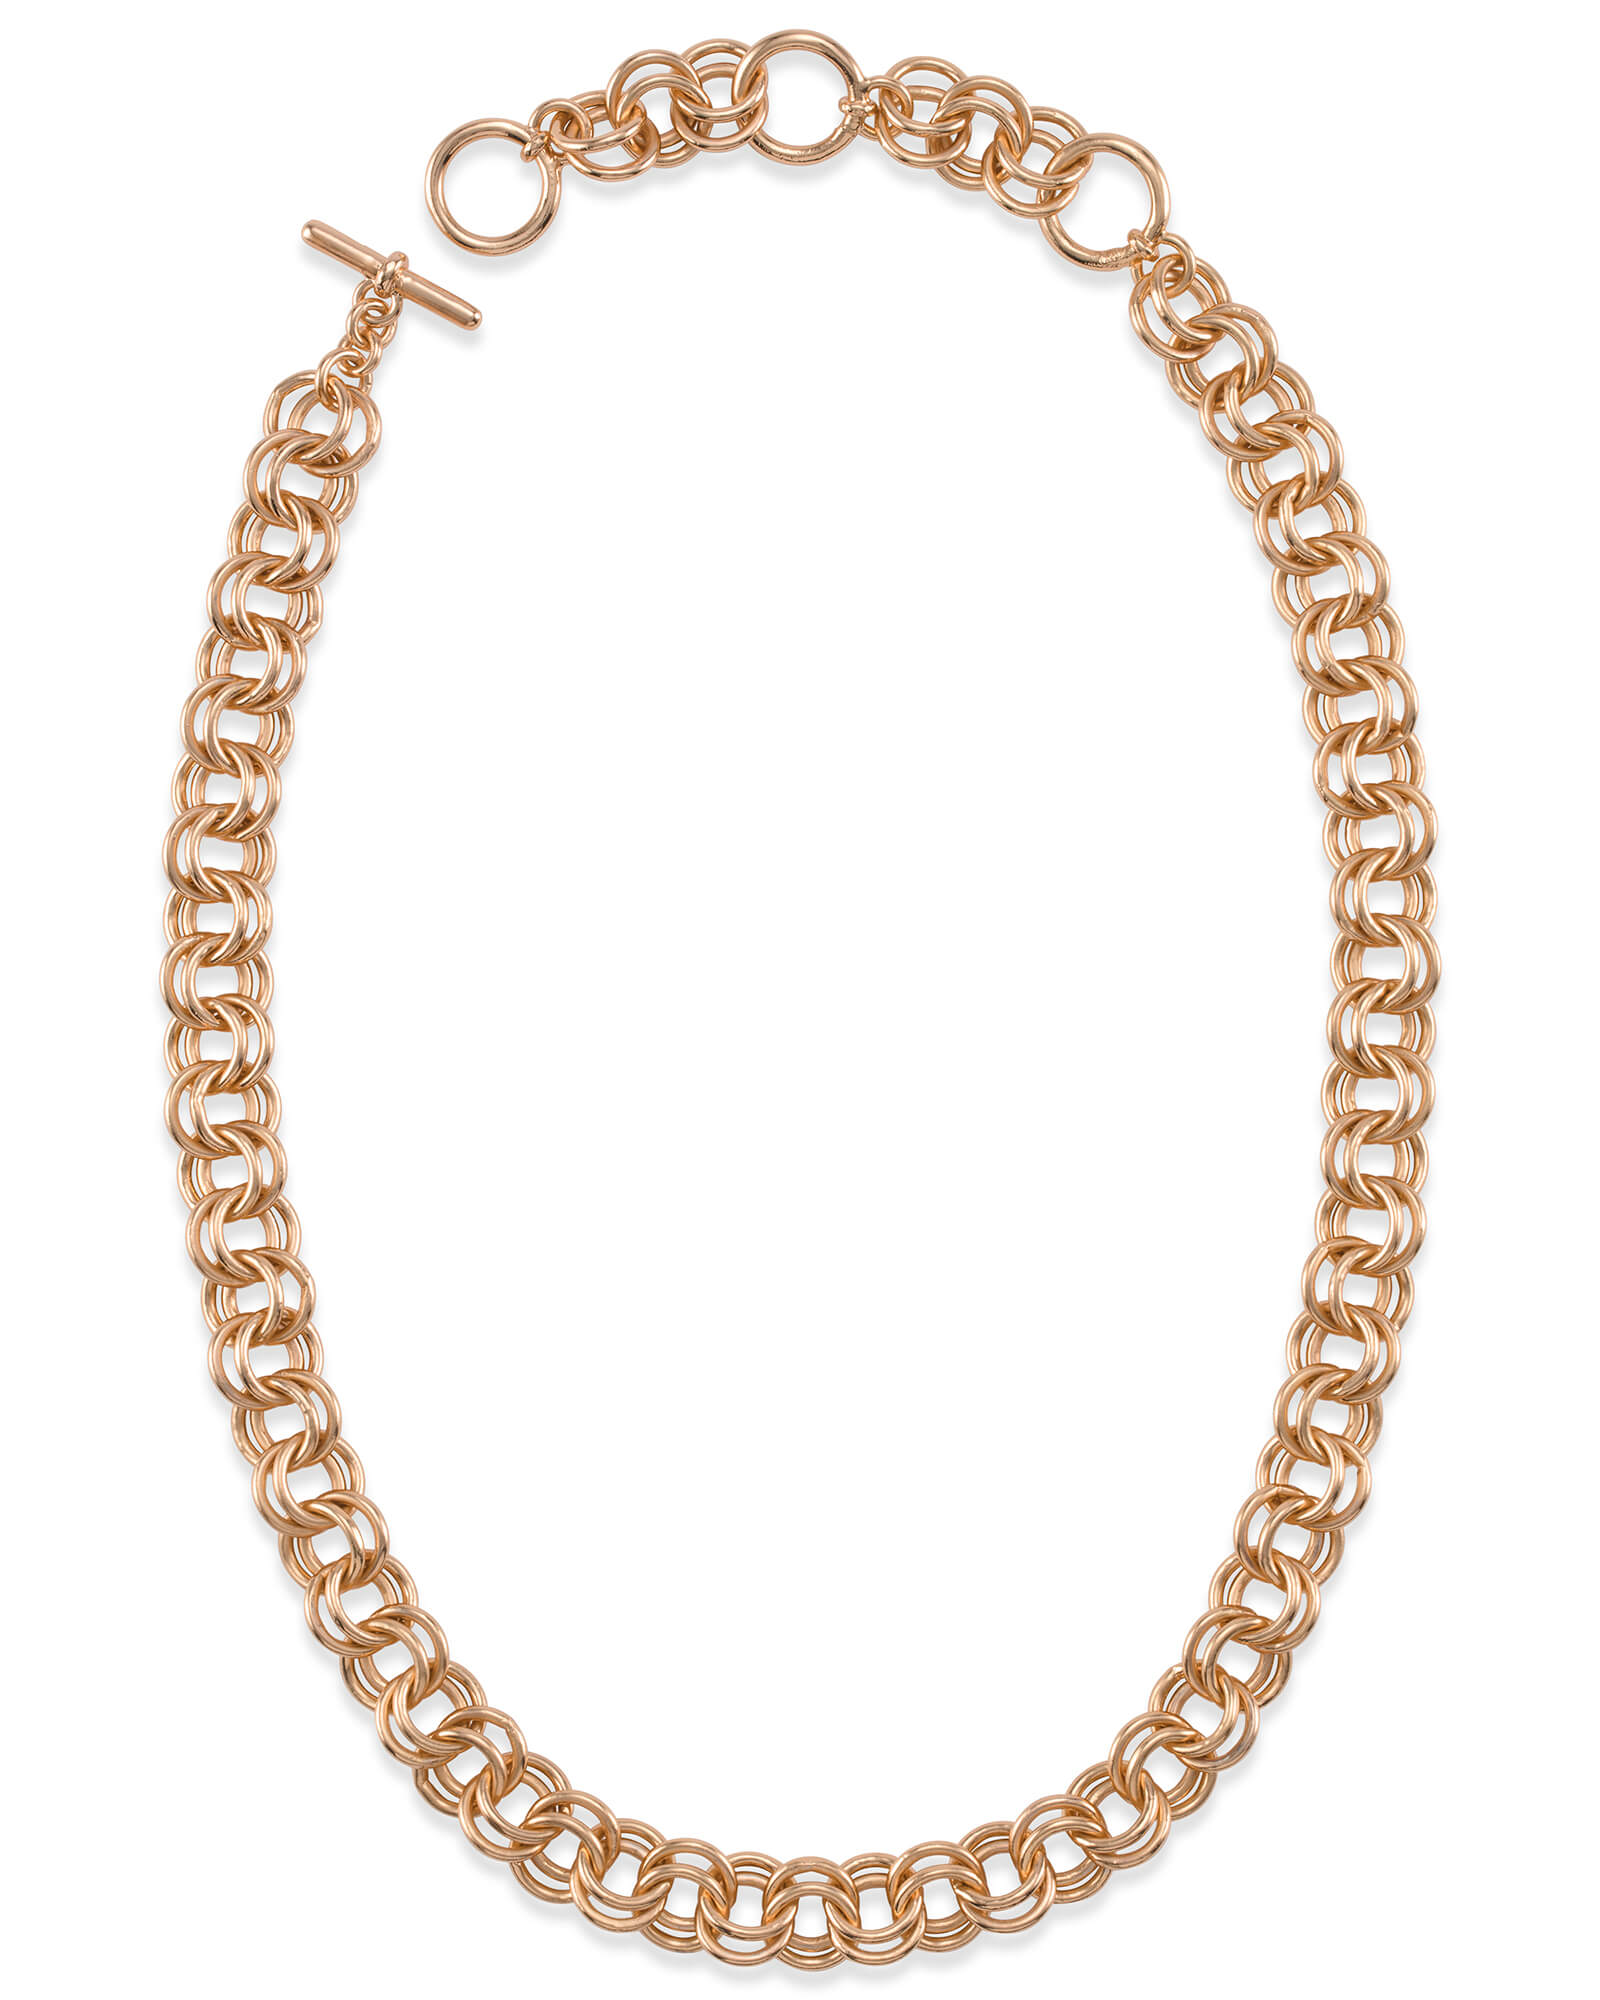 Kendra Scott 18 Inch Double Chain Link Necklace in Rose Gold | Plated Brass